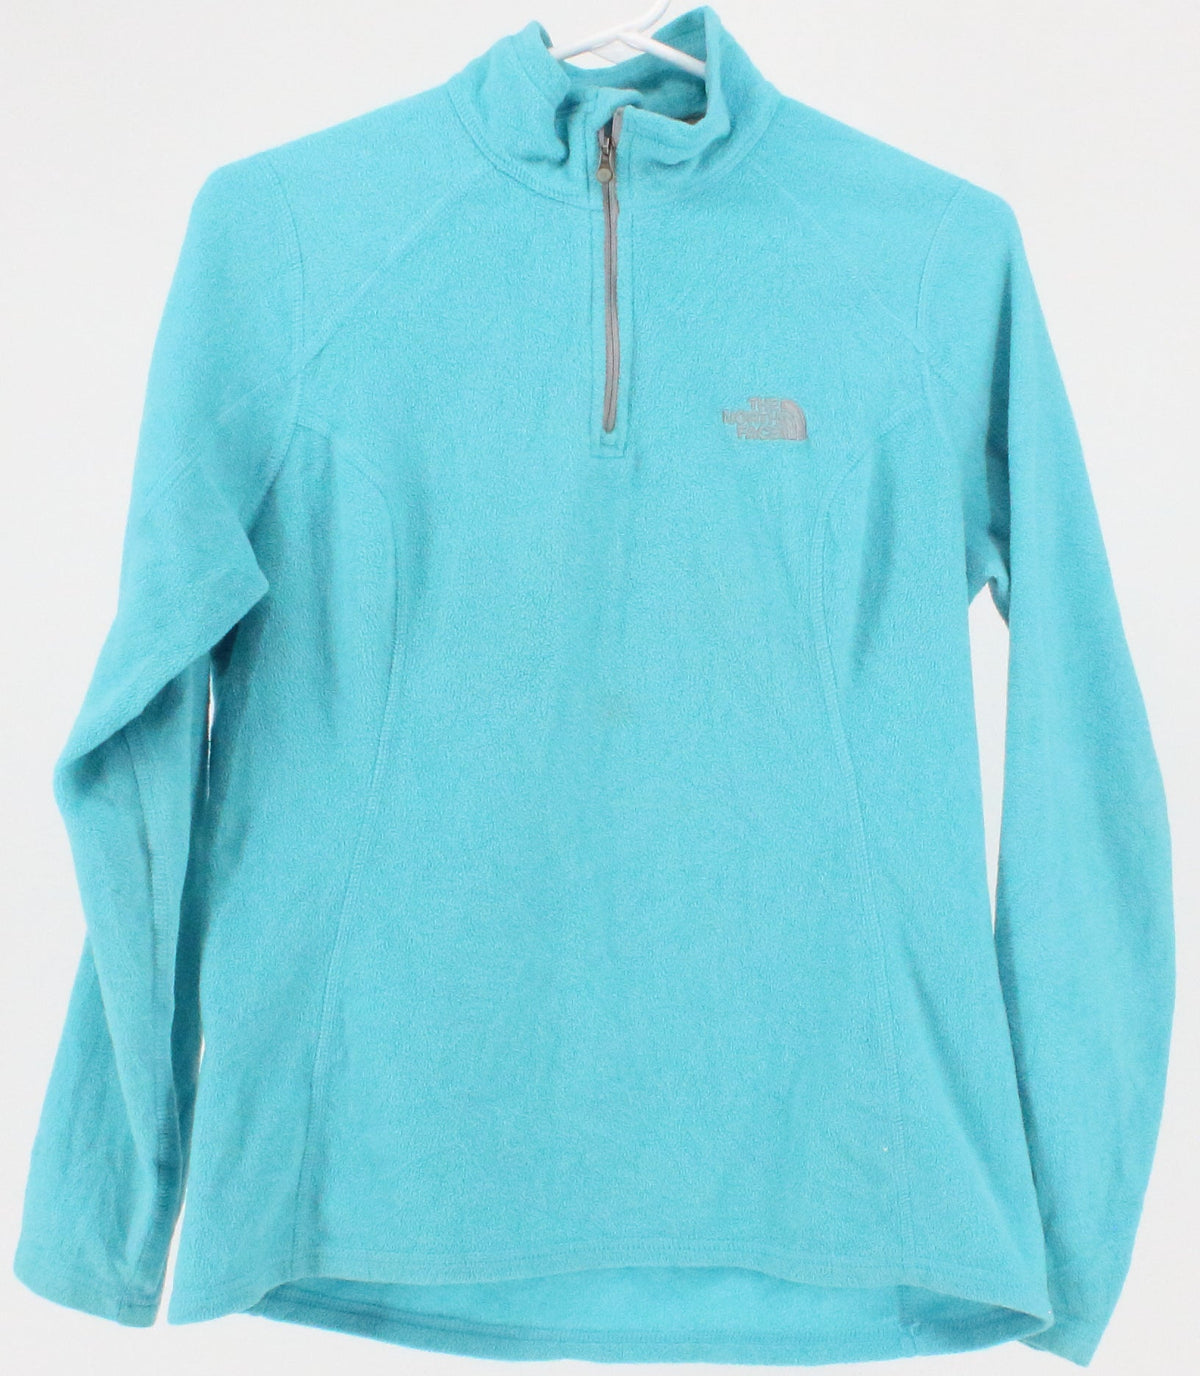 The North Face Turquoise Women's Fleece